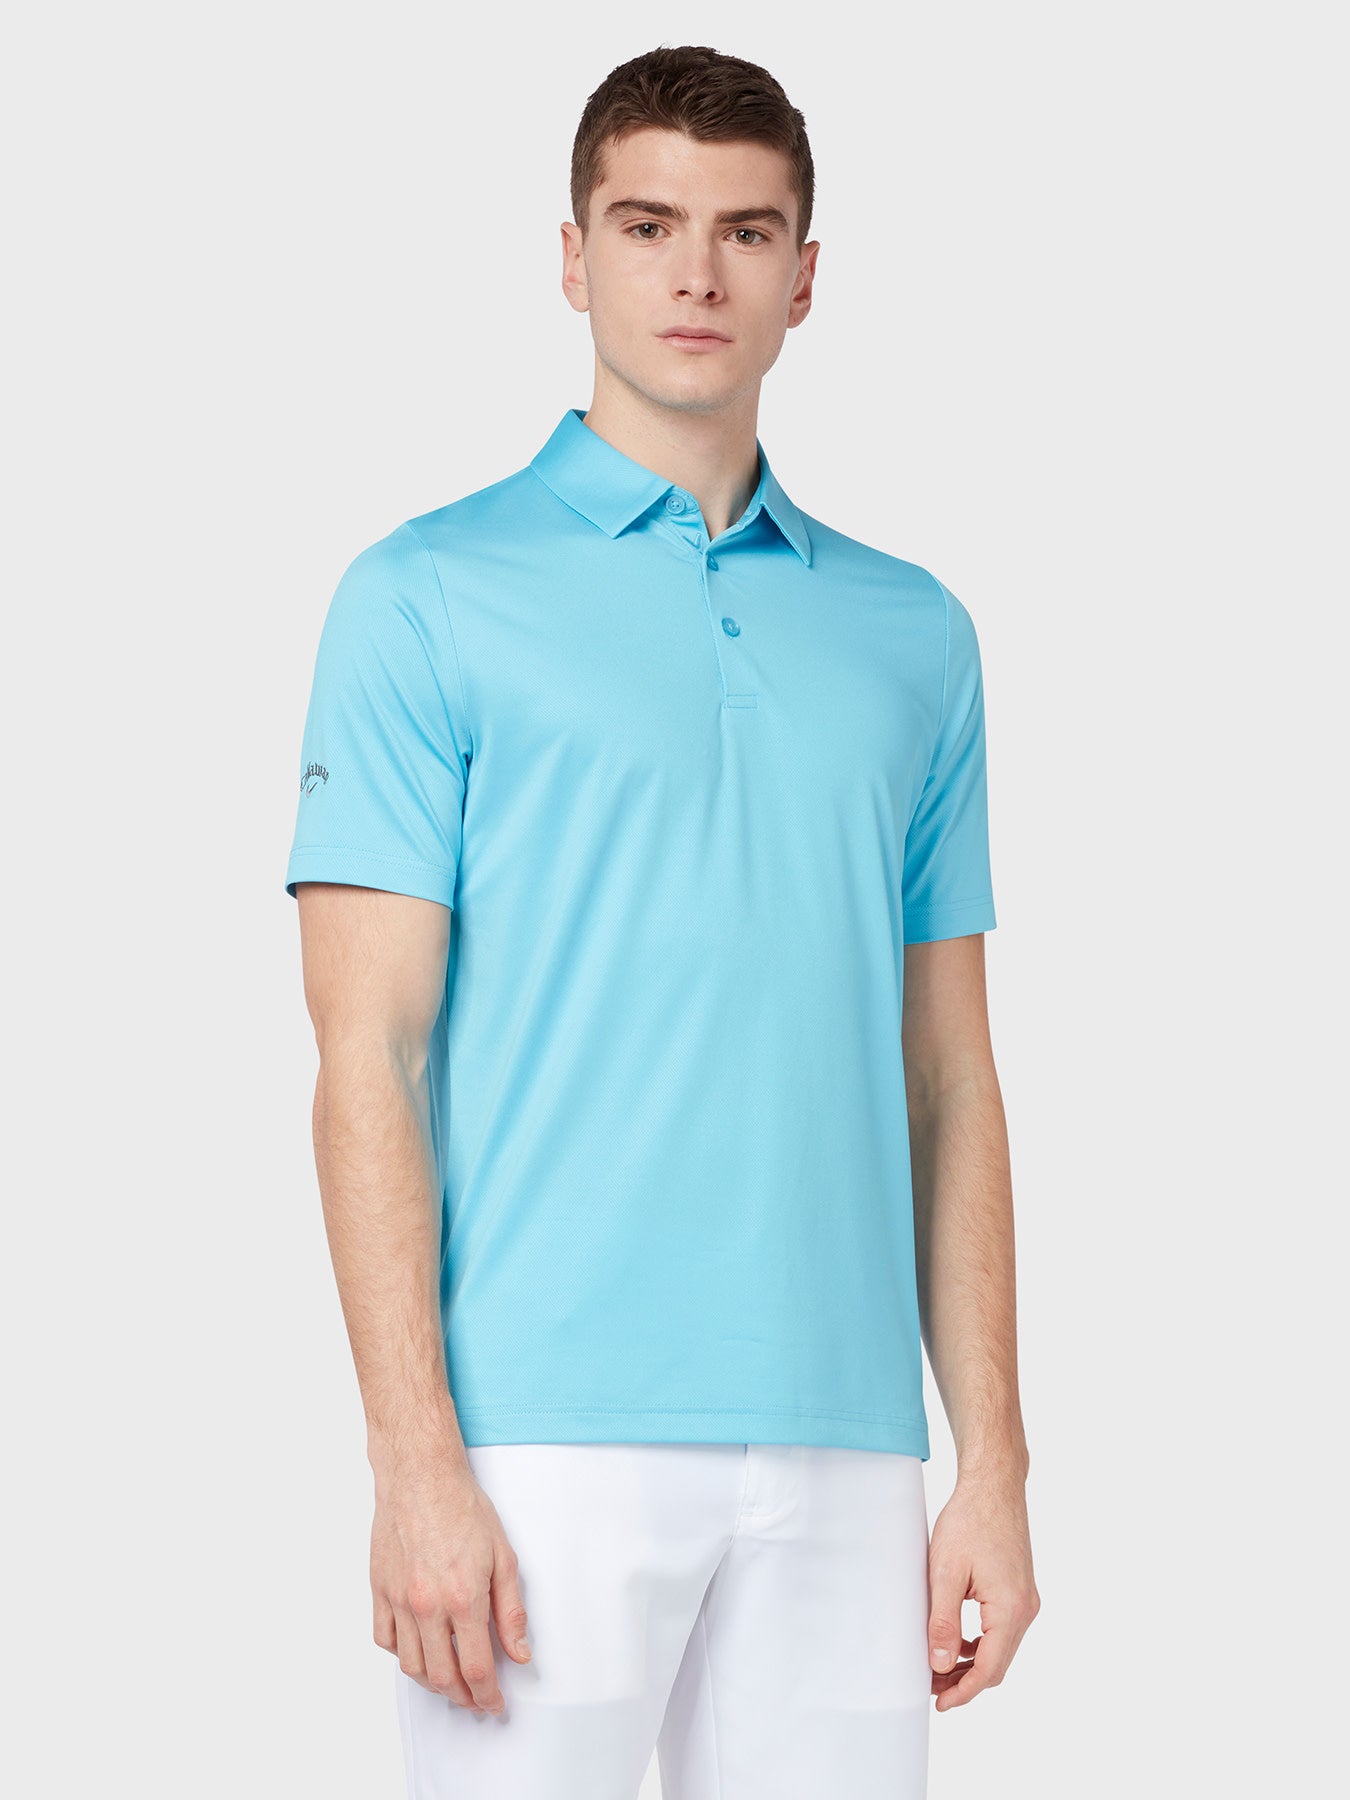 View Swing Tech Tour Polo In Blue Grotto Blue Grotto XXL information